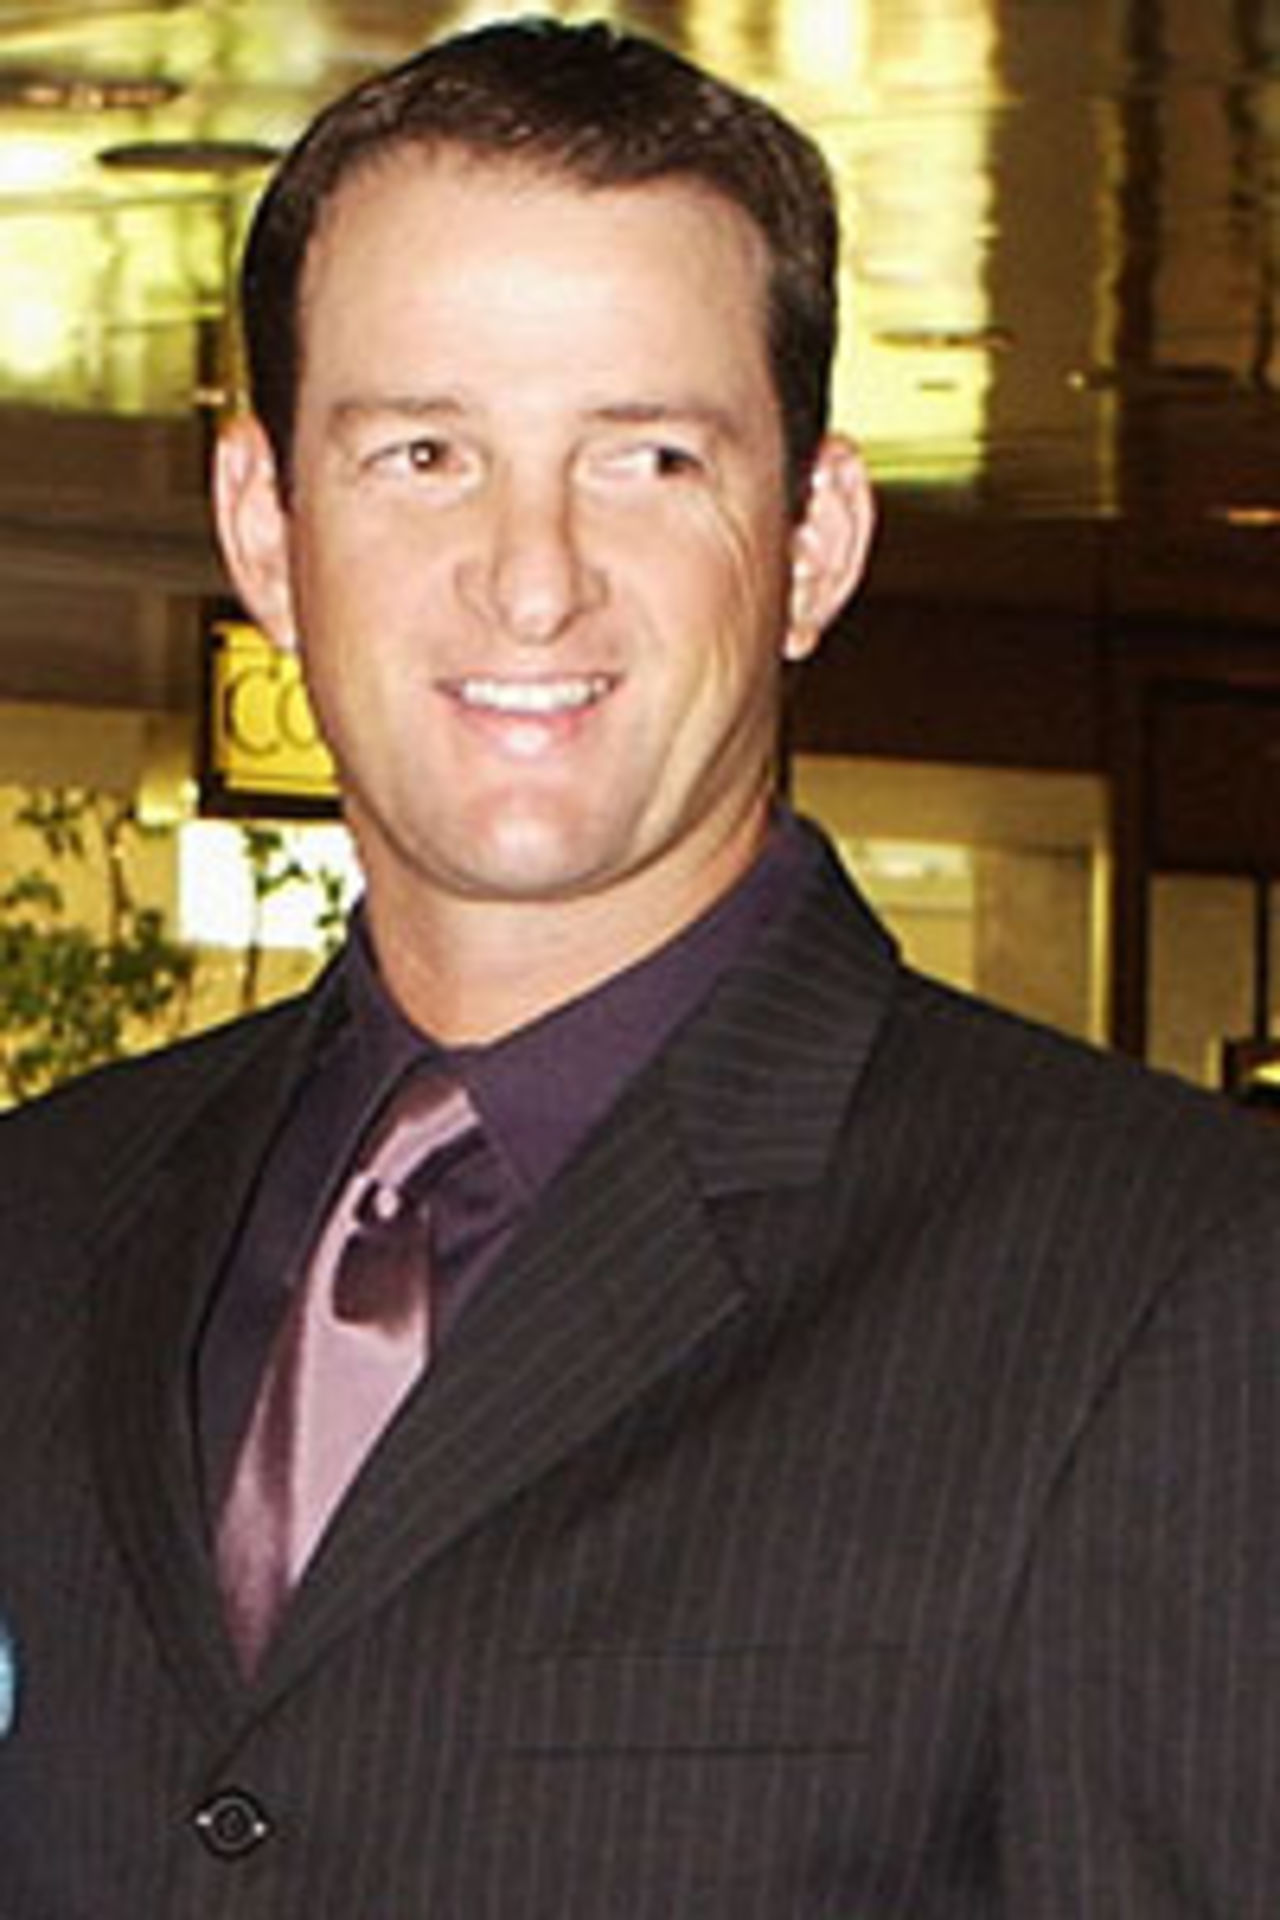 Mark Waugh arrives prior to the presentation of the Allan Border Medal at the Crown Palladium Ballroom in Melbourne, Australia on January 28, 2003.